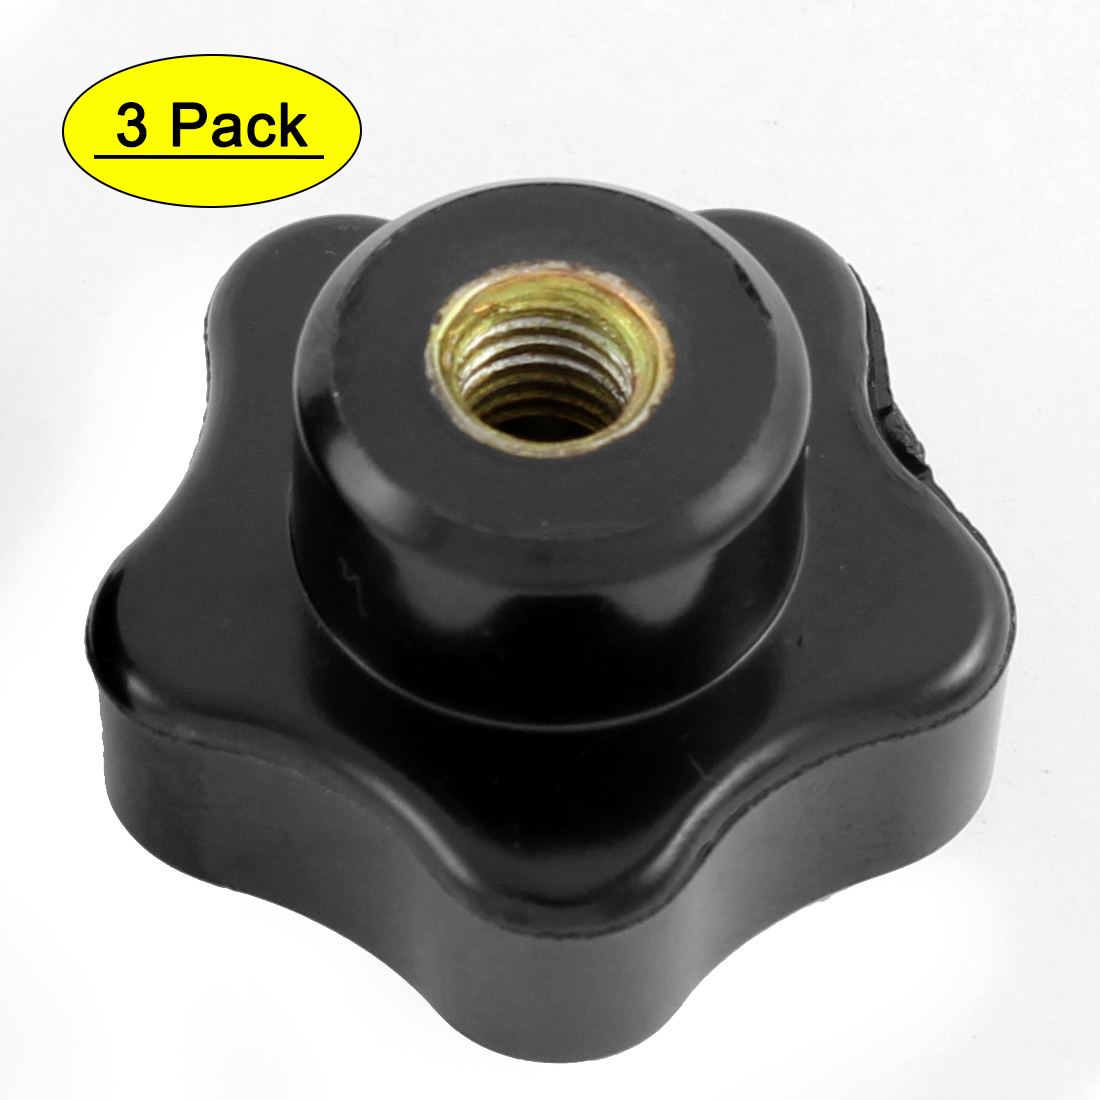 MroMax 2PCS M5x30mm Star Handle Knob Thread Replacement Tightening Screw Quick Disassembly Replacement Parts Clamping Handle Grip Screw Knob Black